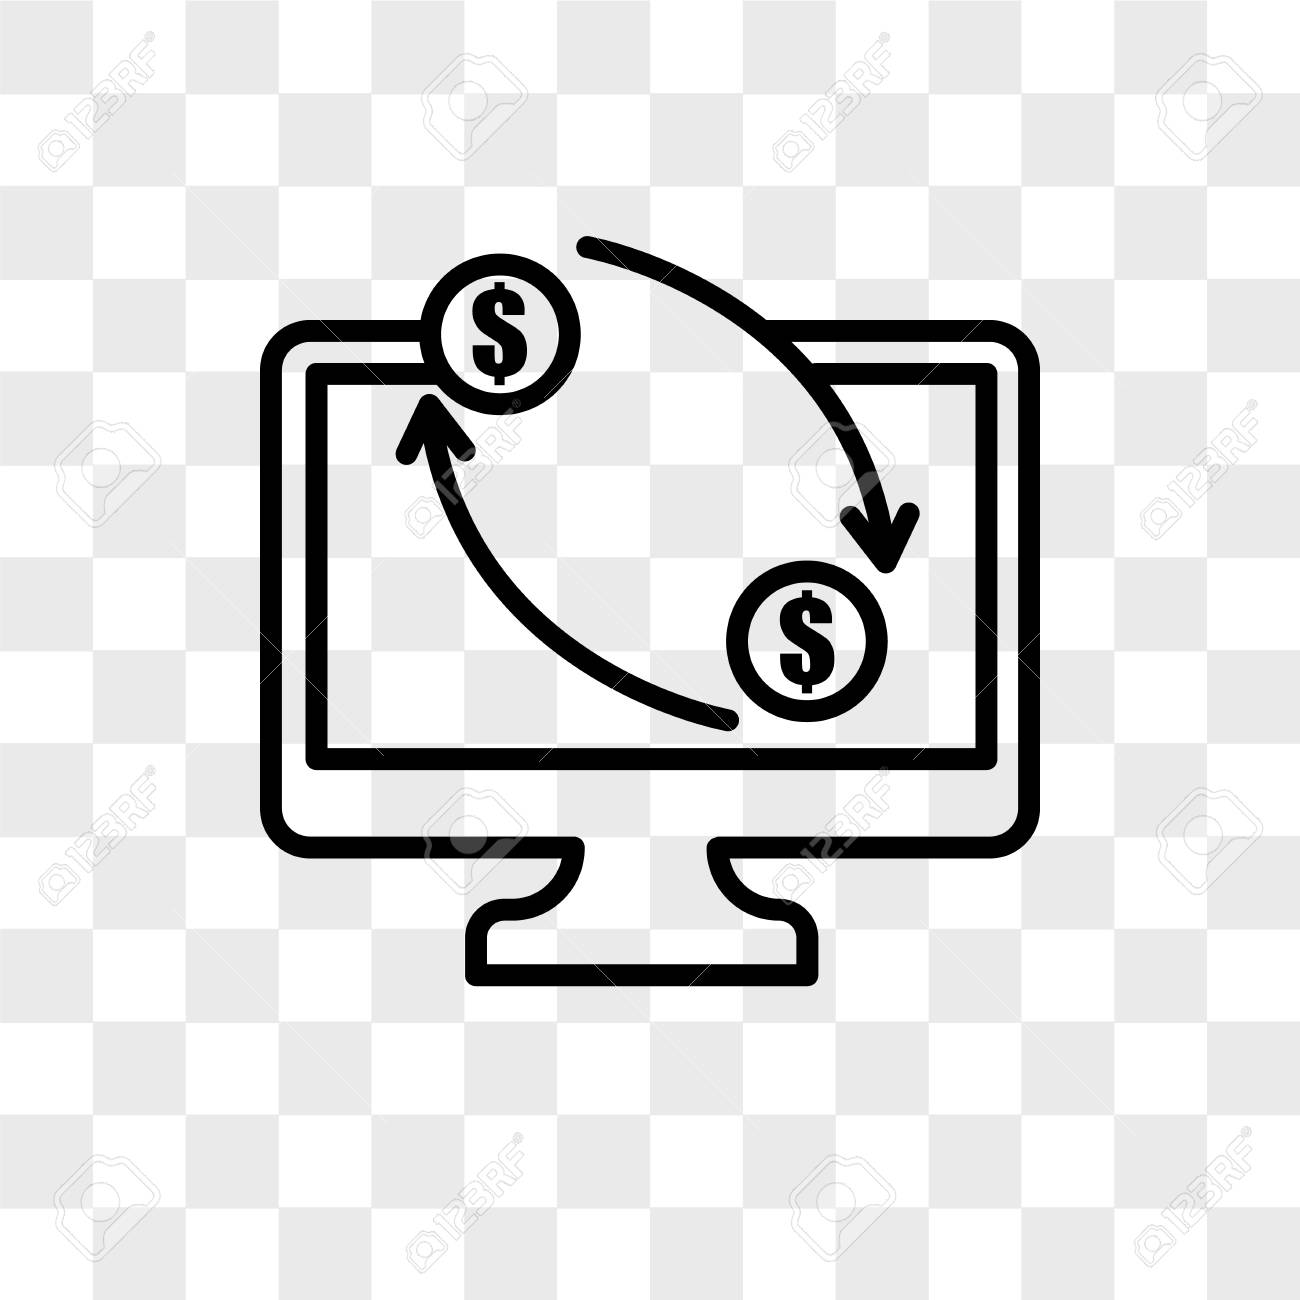 Online Banking Vector Icon Isolated On Transparent Background